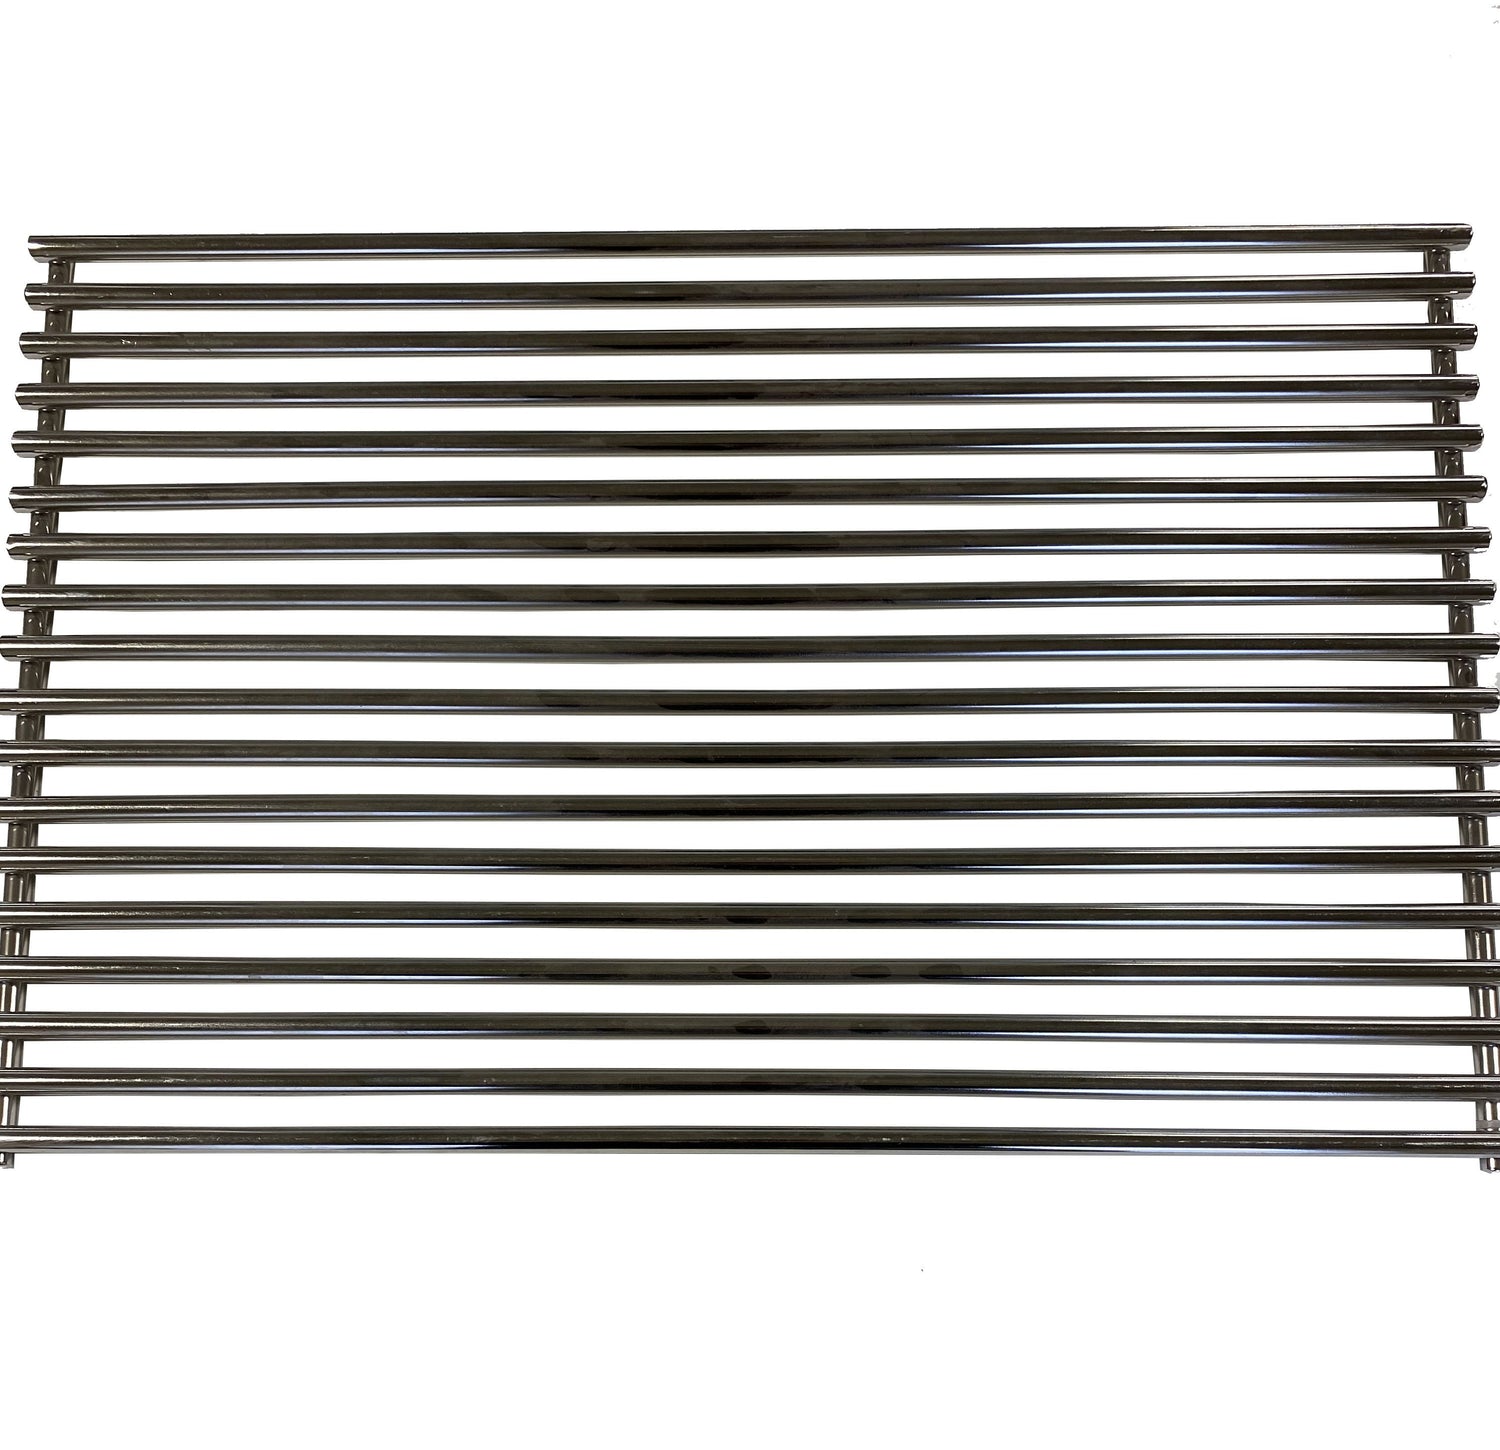 Broil King 22022284 regal stainless steel grid. Grill grates are one of the most versatile and used pieces of the BBQ. Adding flavor, sear marks and so much more. Replace those old rusted or cracked grills before your next grilling party. Available at Barbecues Galore.